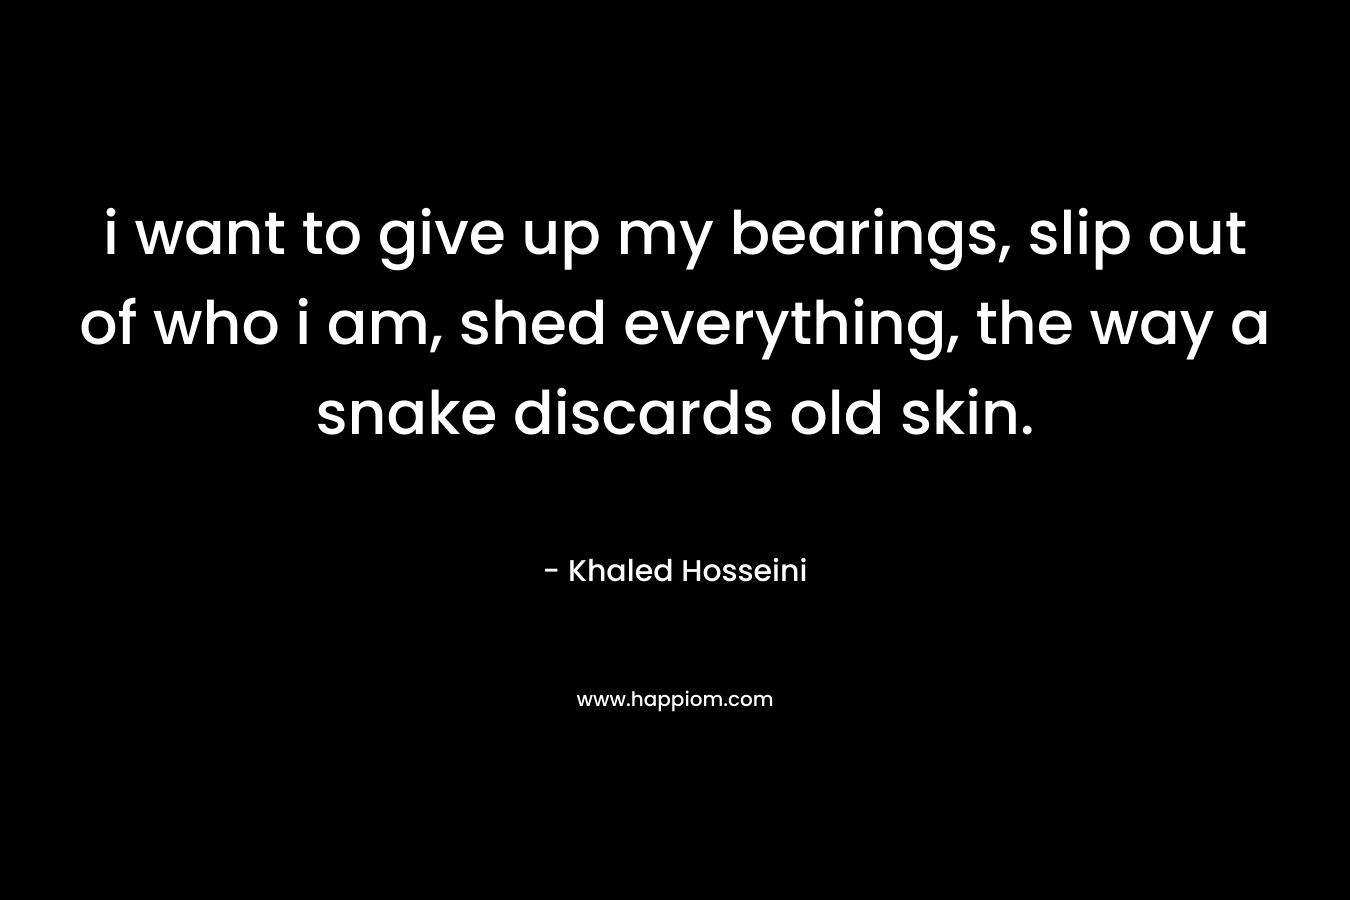 i want to give up my bearings, slip out of who i am, shed everything, the way a snake discards old skin. – Khaled Hosseini